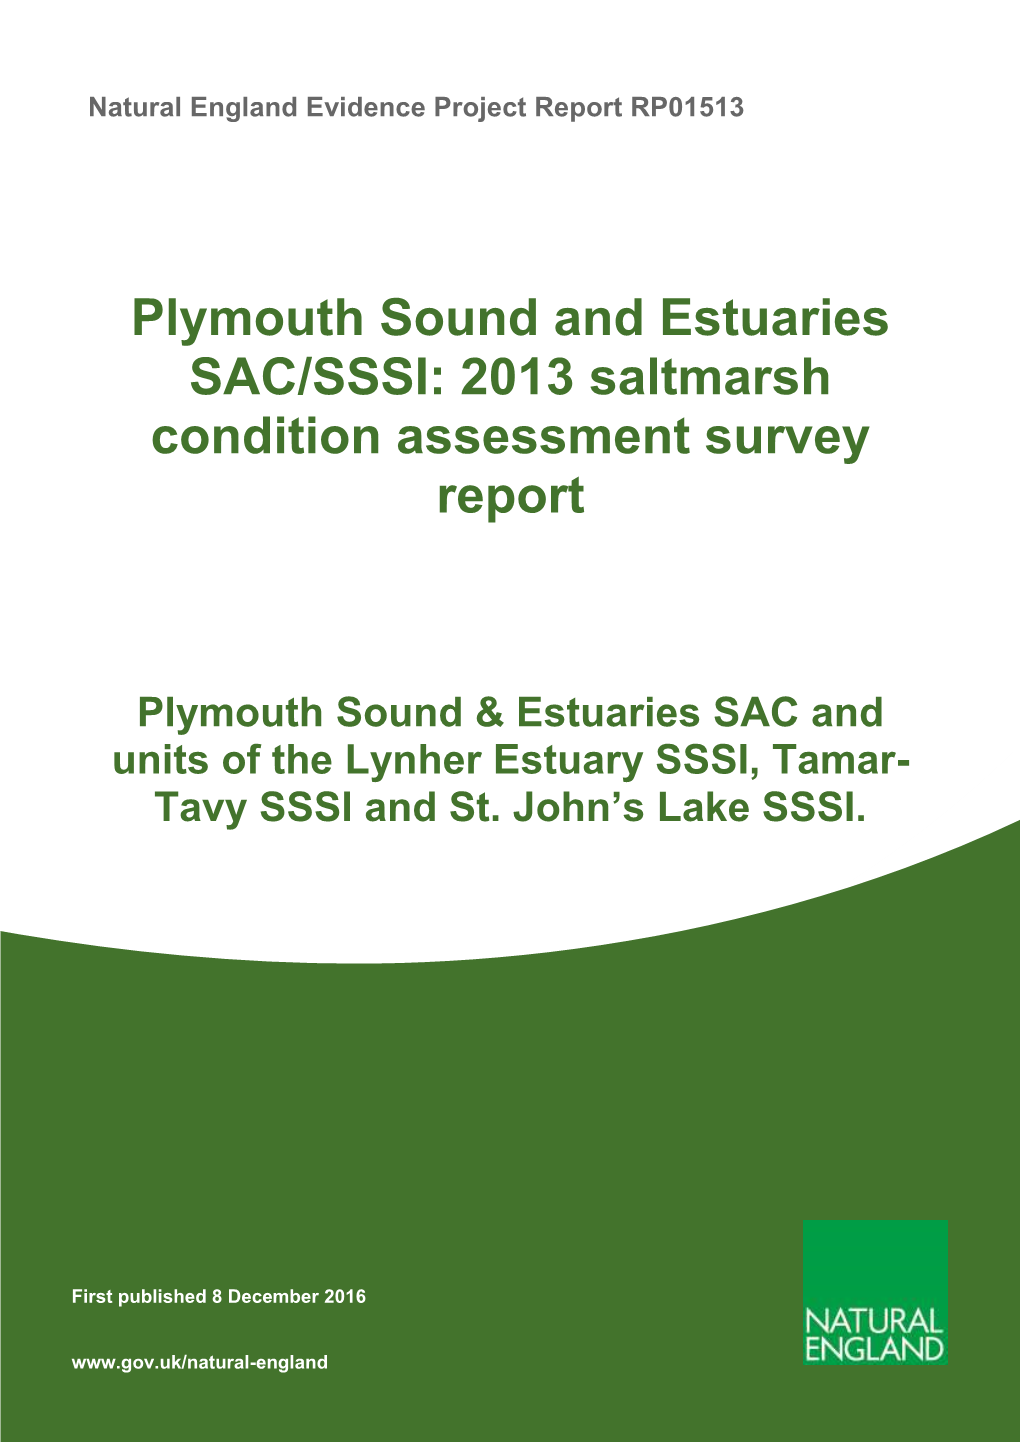 Plymouth Sound and Estuaries SAC/SSSI: 2013 Saltmarsh Condition Assessment Survey Report